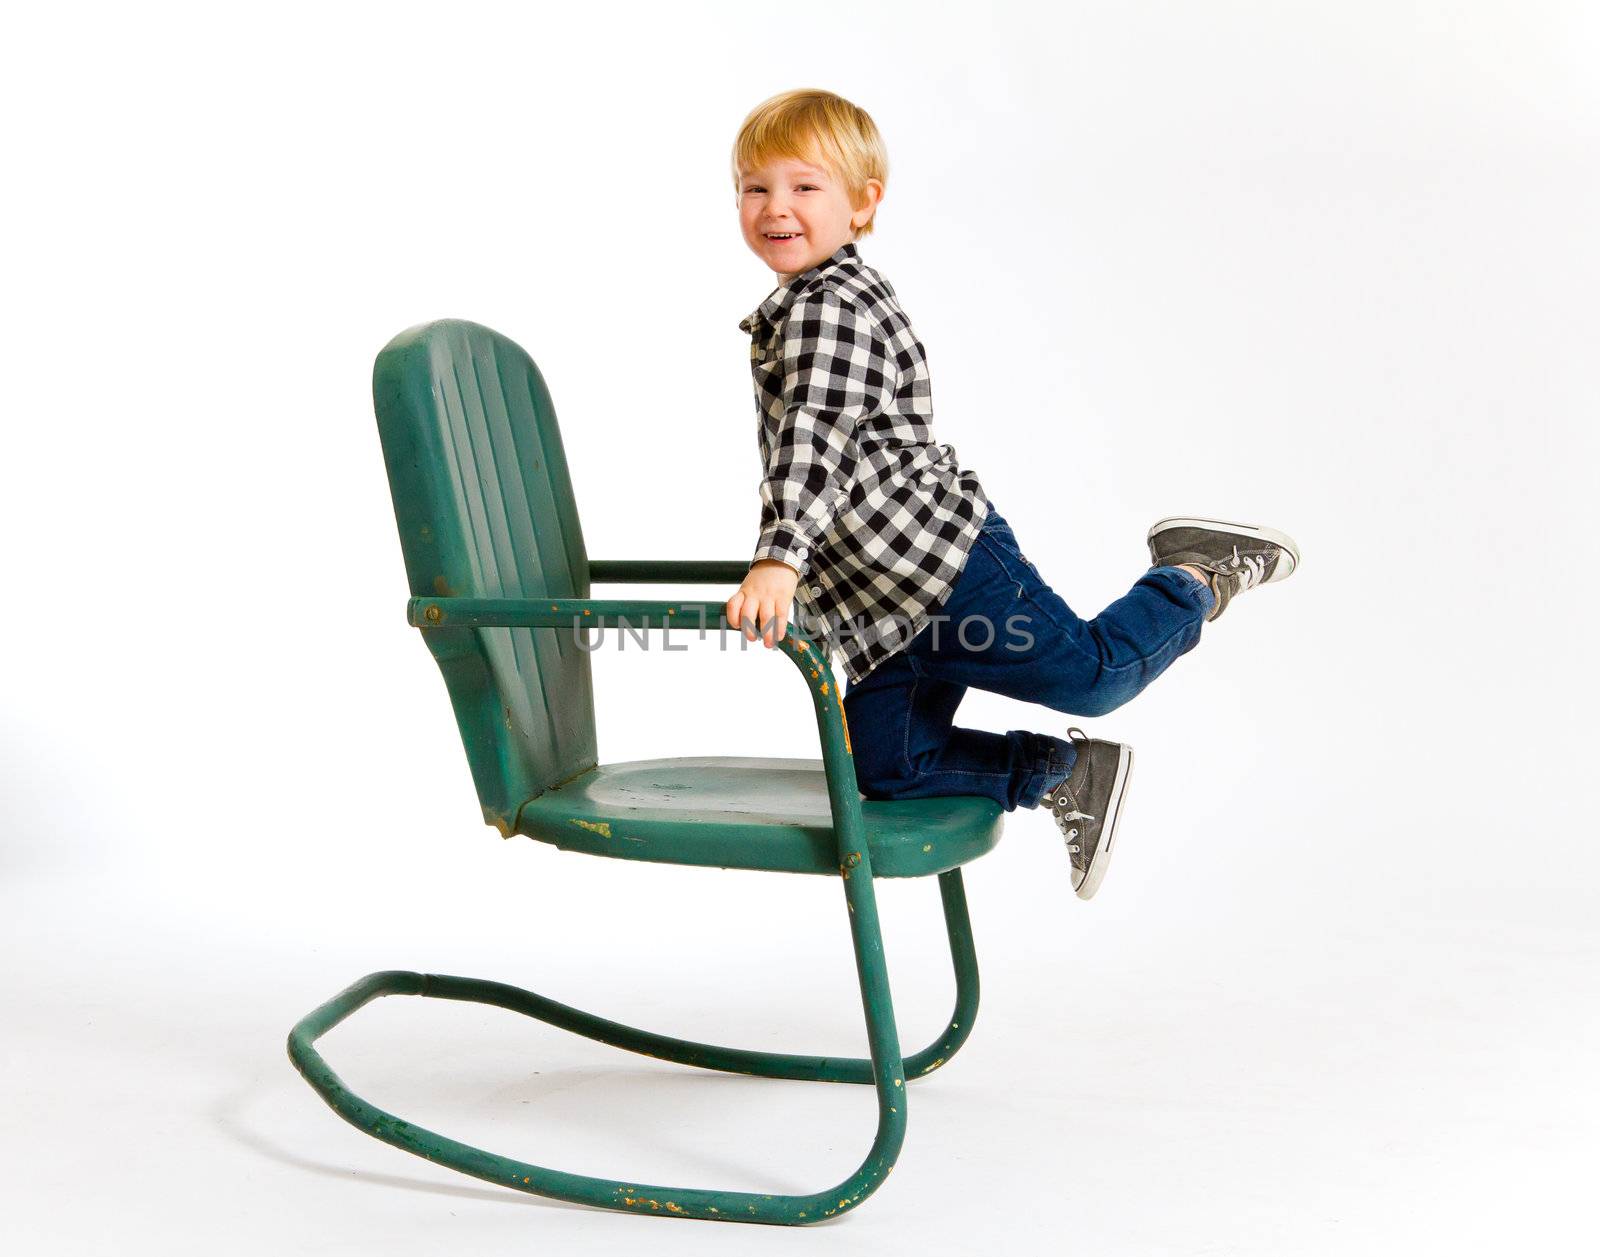 A boy in a plaid shirt has a fun time playing on this green rocking chair against an isolated white background in the studio.